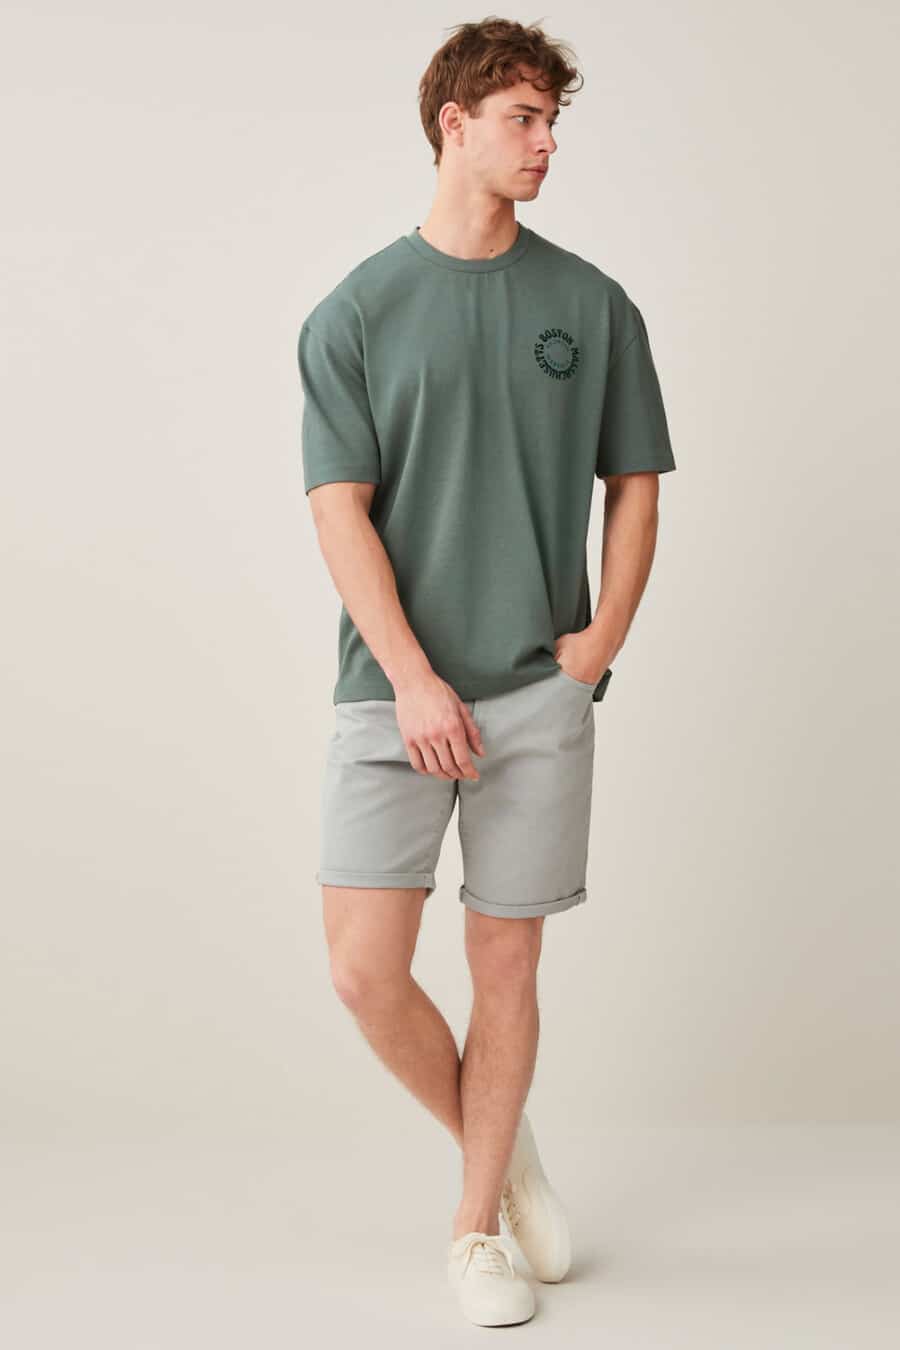 Men's grey shorts, green T-shirt and off-white canvas sneakers outfit